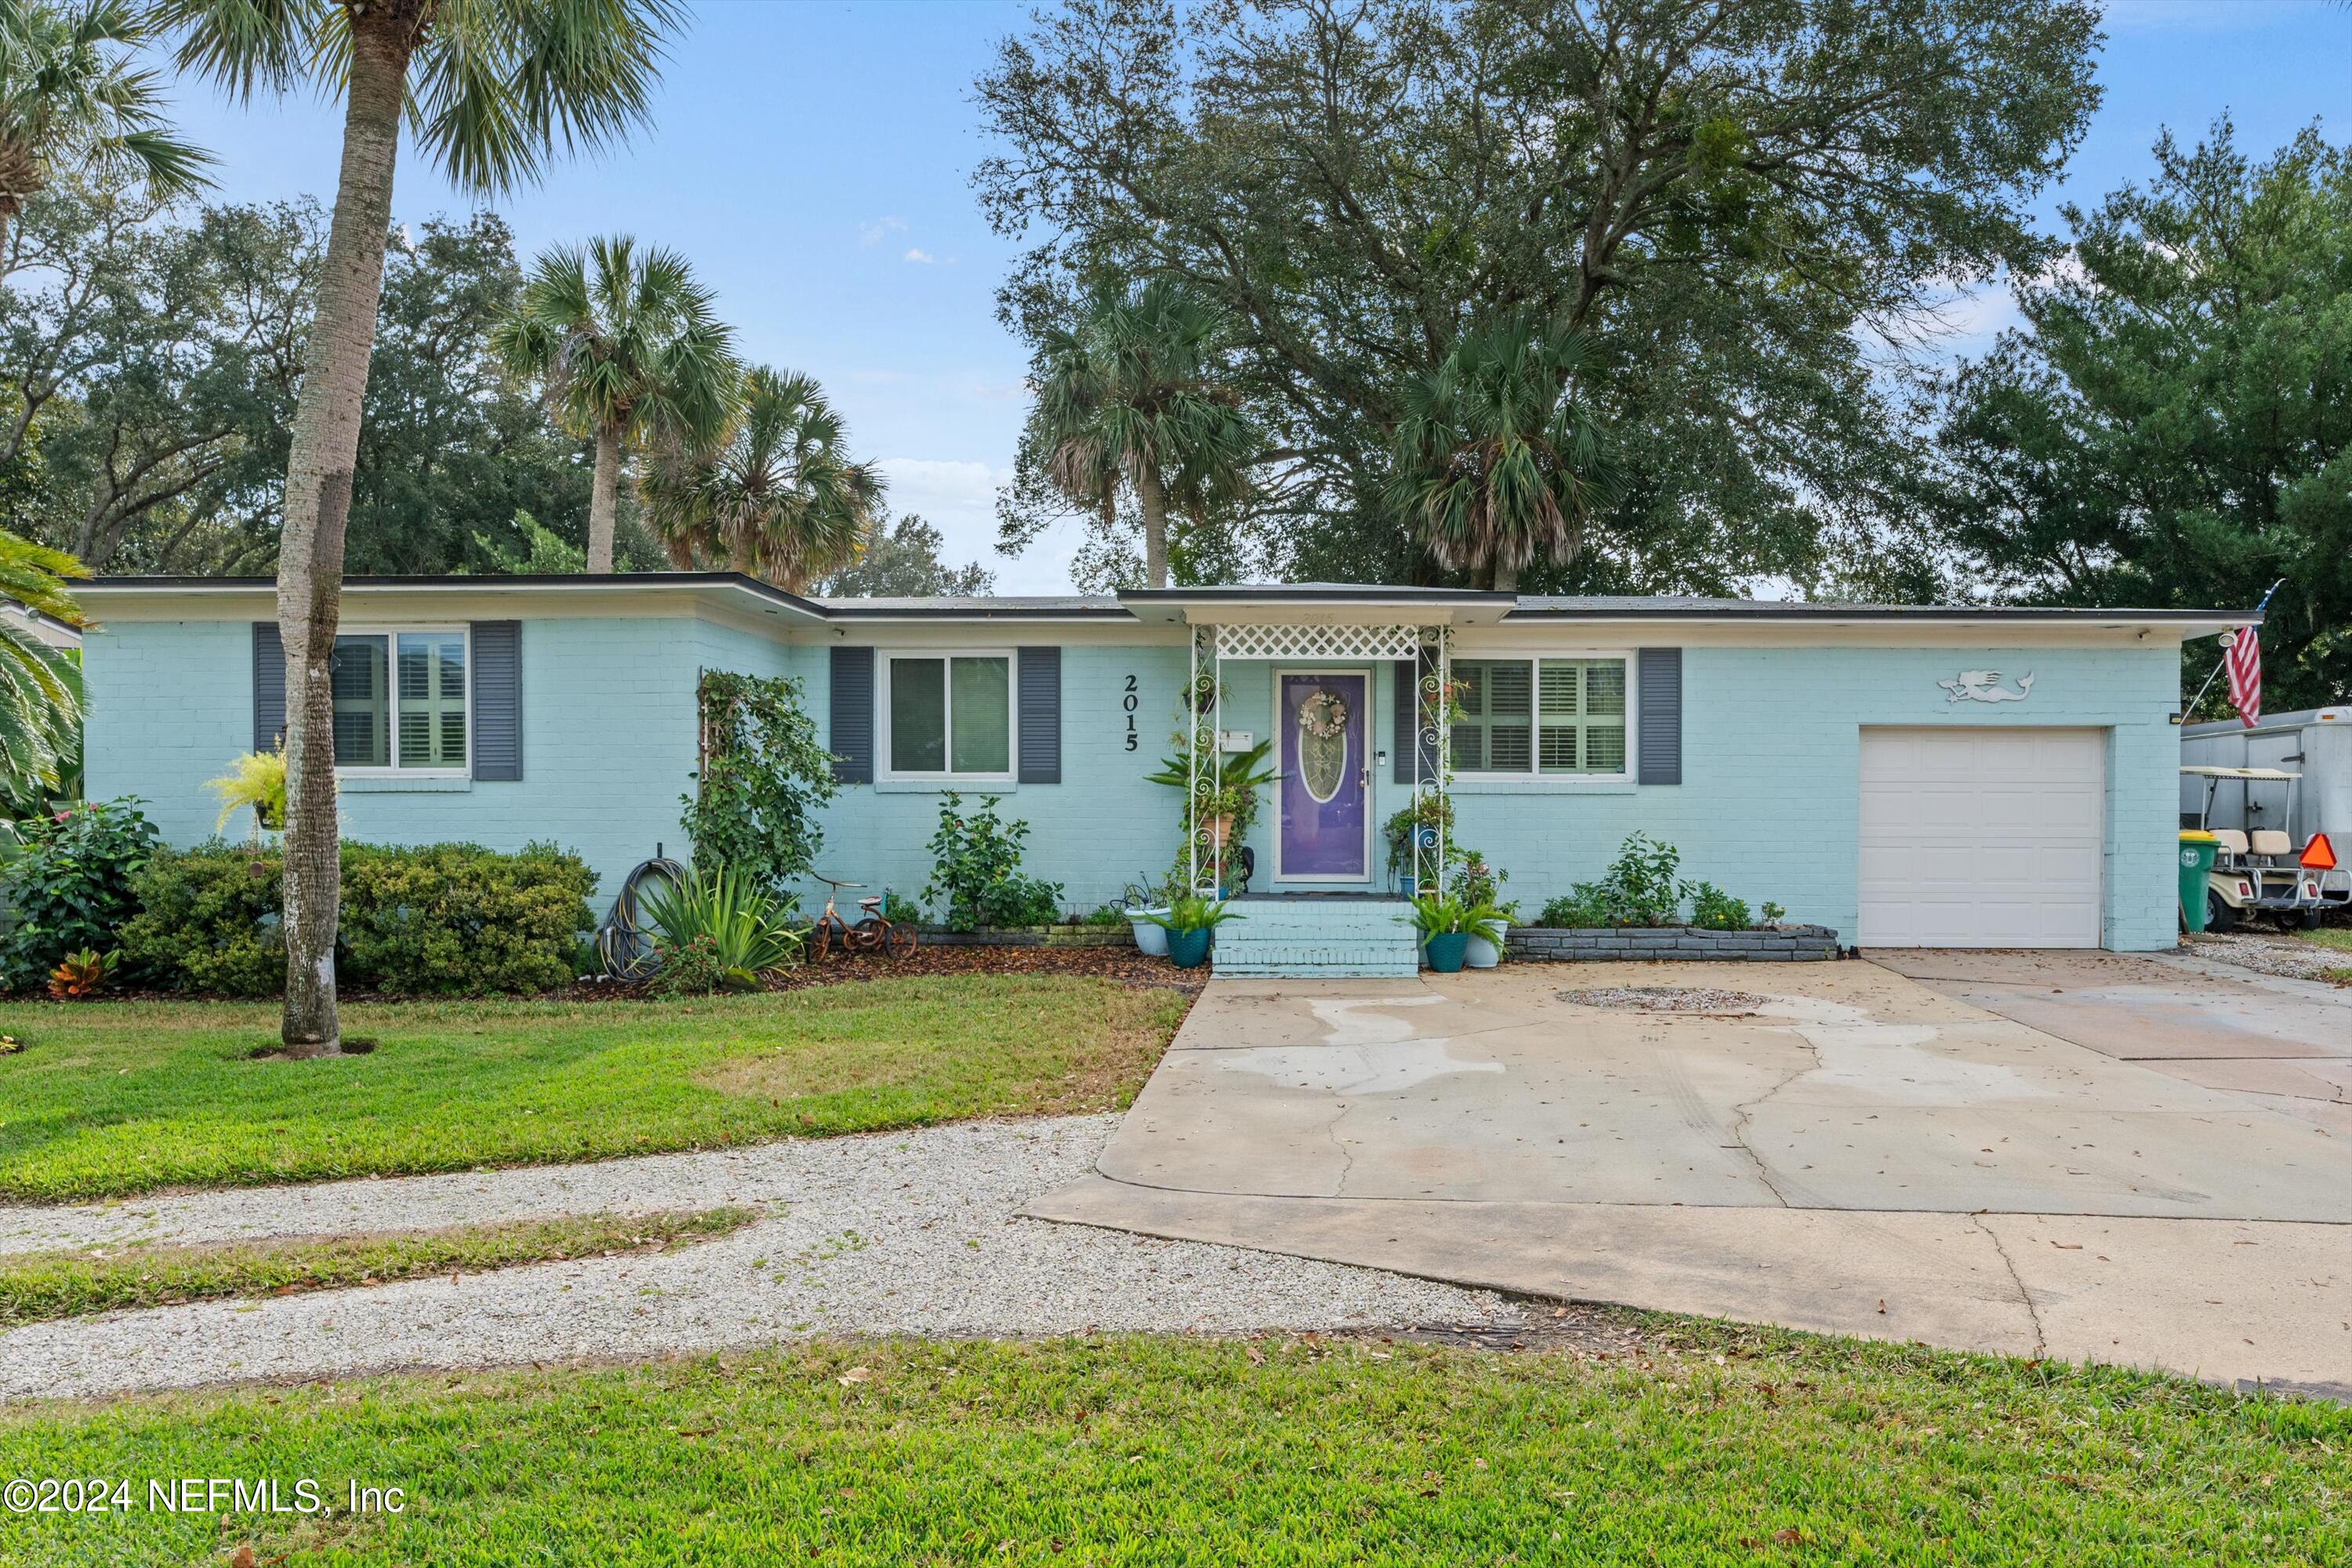 Jacksonville Beach, FL home for sale located at 2015 Penman Road, Jacksonville Beach, FL 32250